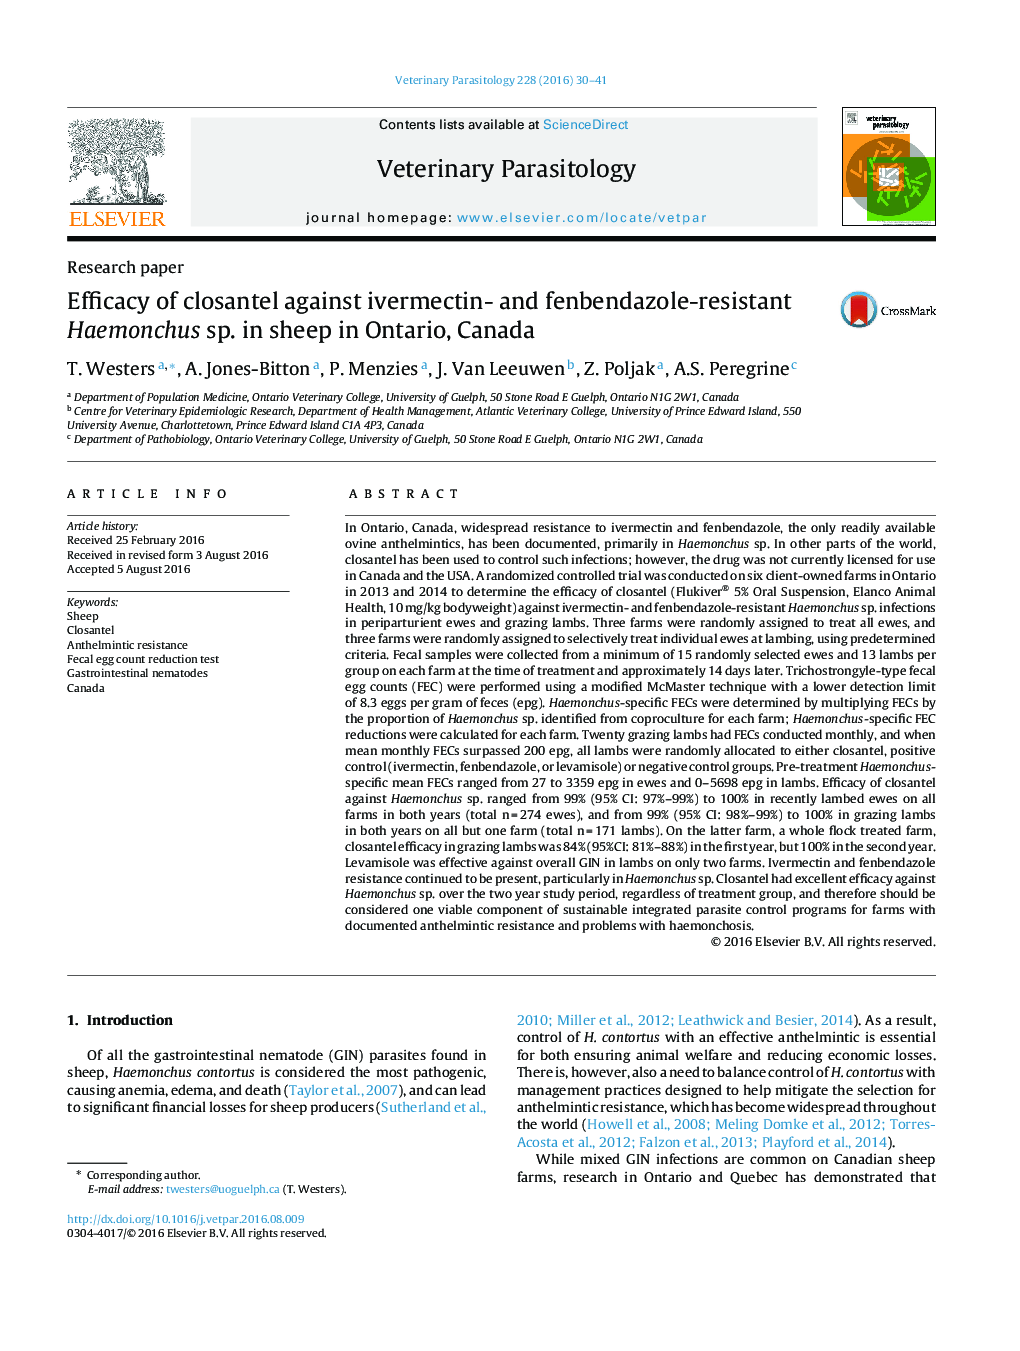 Efficacy of closantel against ivermectin- and fenbendazole-resistant Haemonchus sp. in sheep in Ontario, Canada